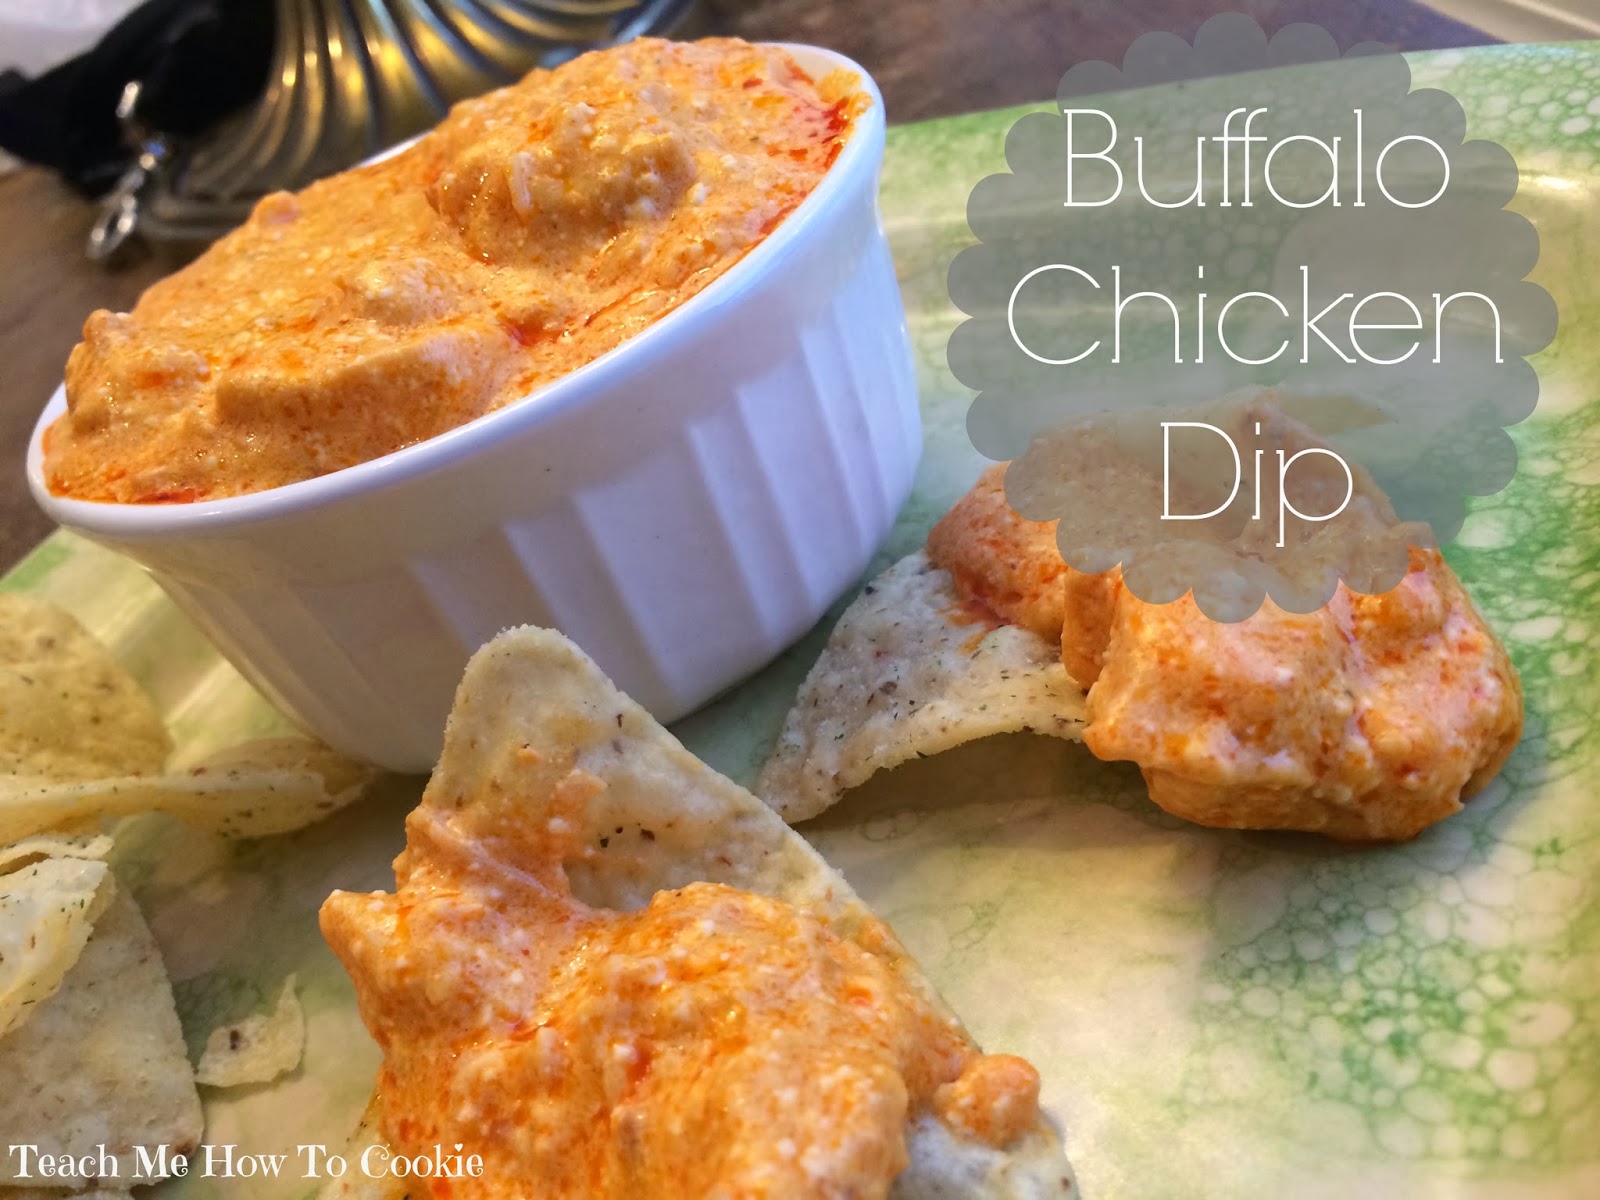 Teach Me How To Cookie: Game Day Snacks: Buffalo Chicken Dip & Nutella ...